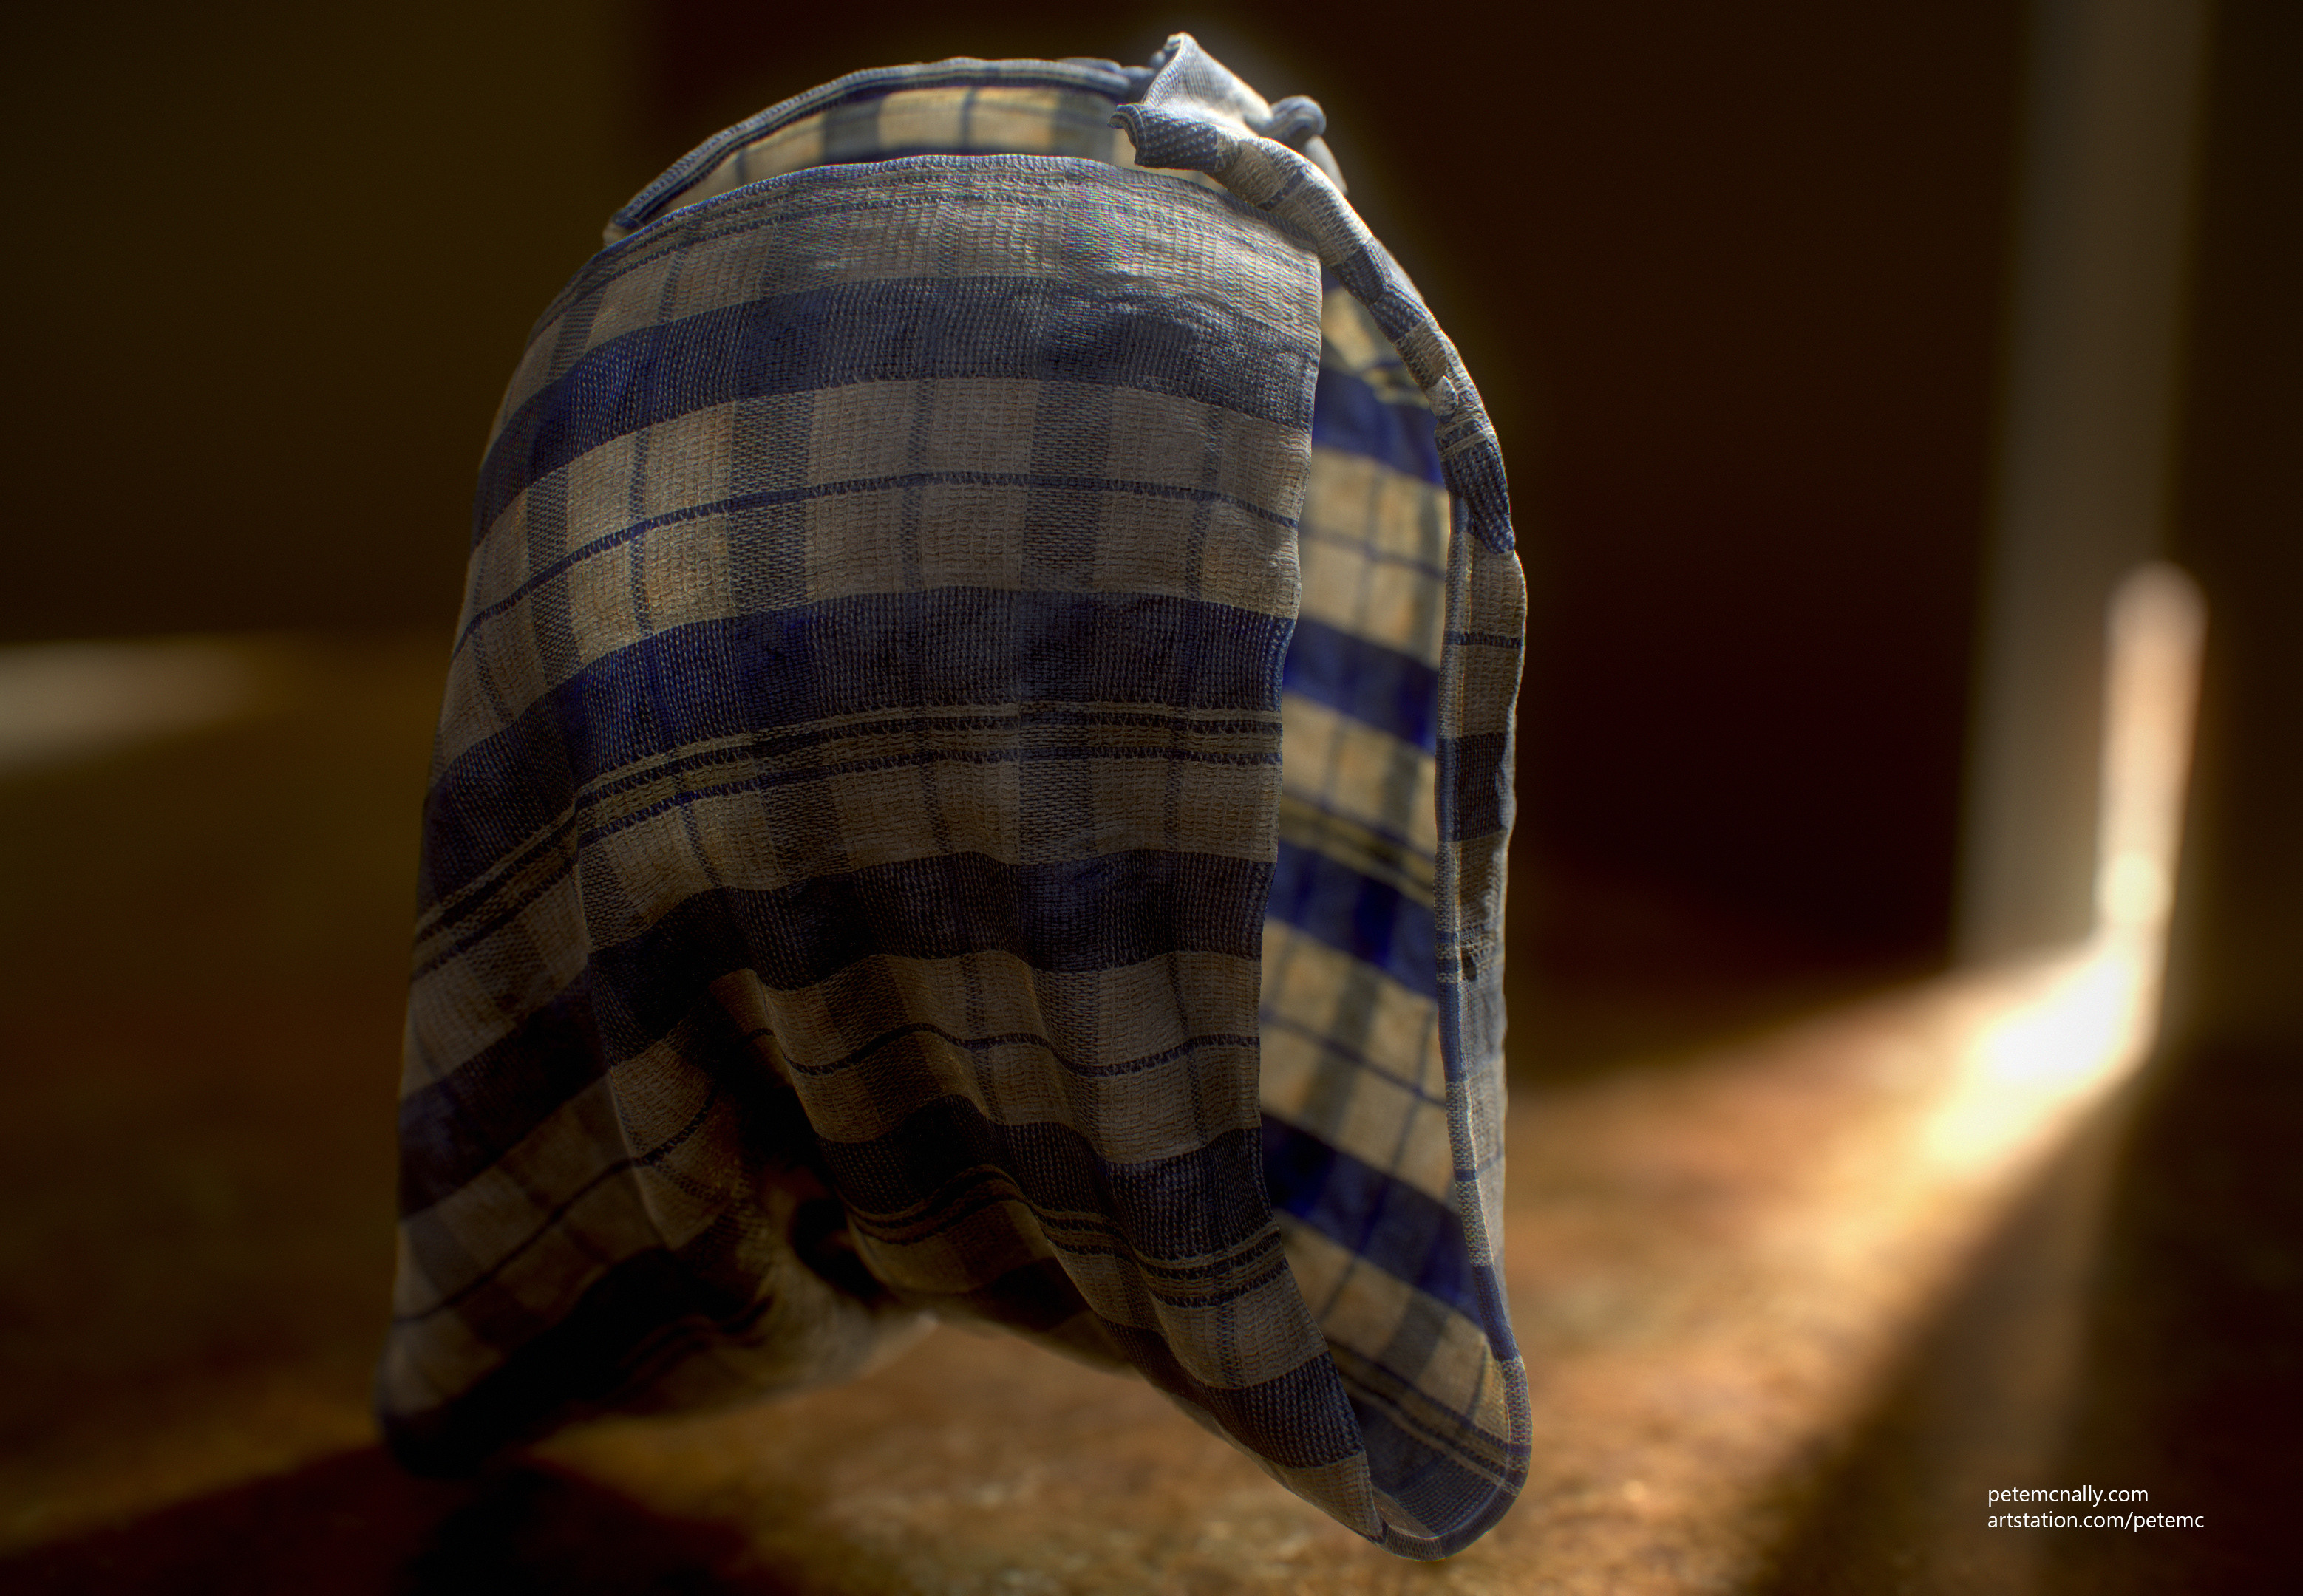 Old dish cloth material test, I wanted to get good backscattering here